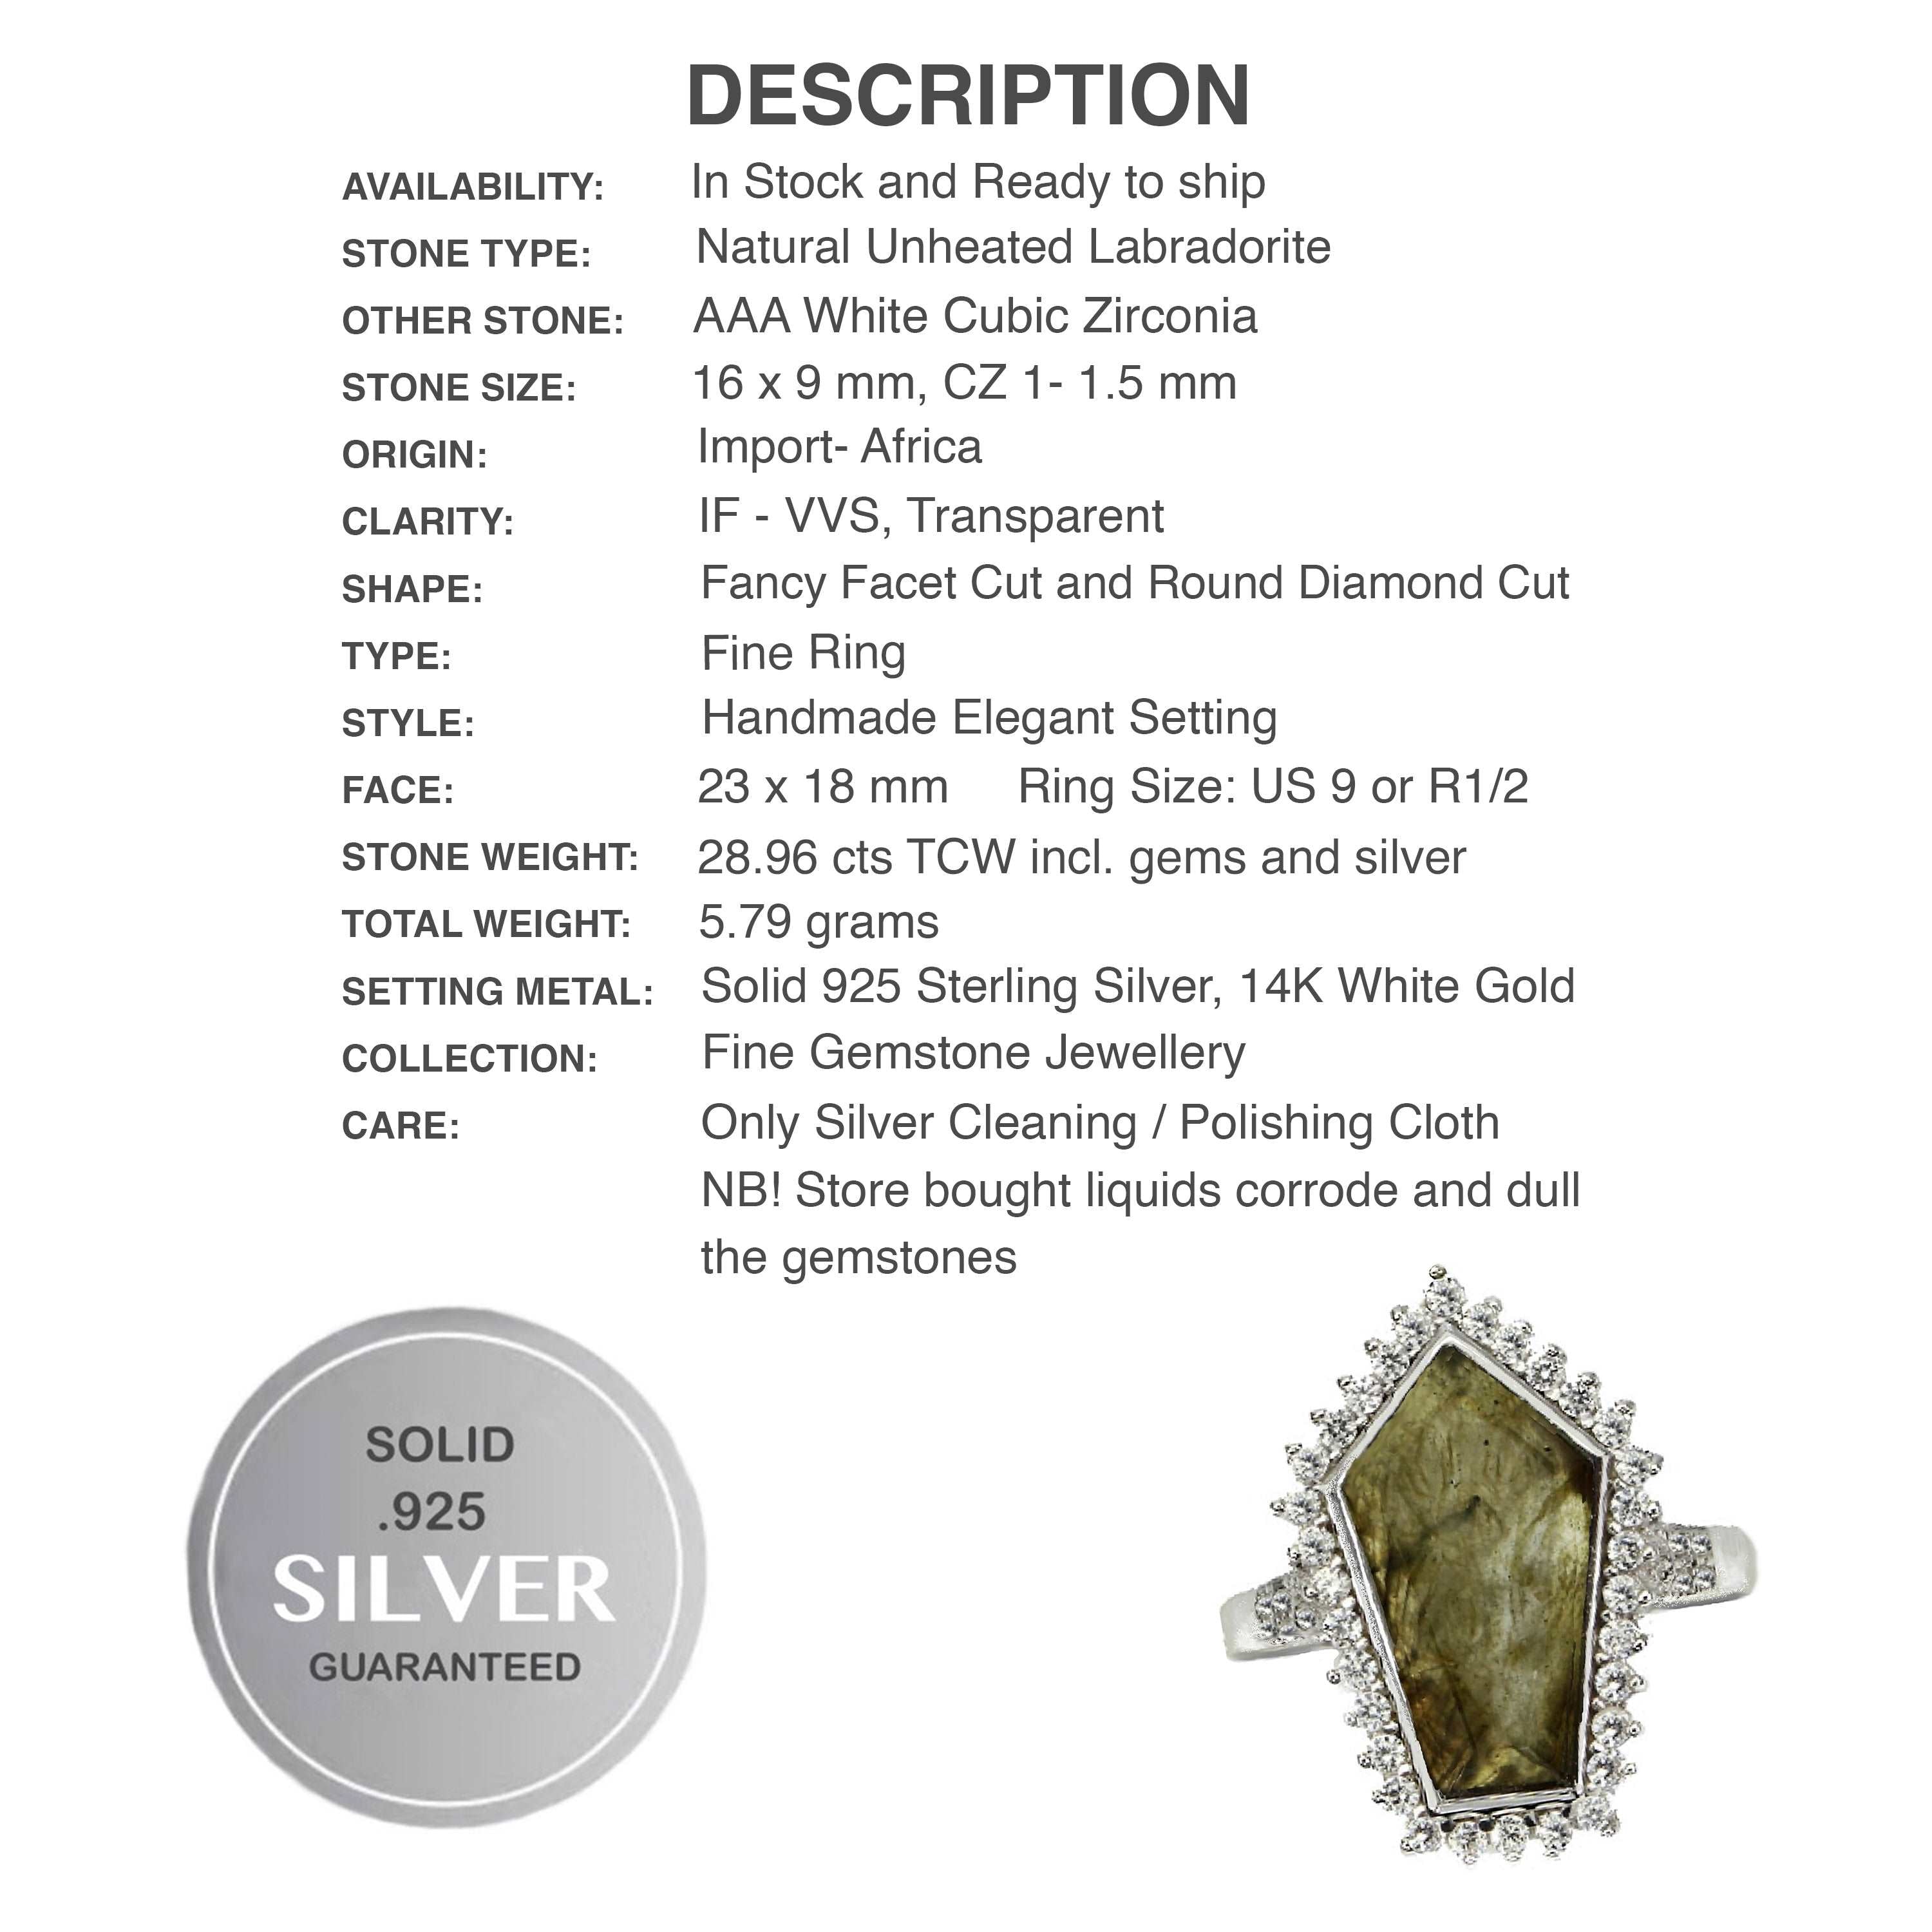 Rare Deluxe Natural Unheated Labradorite AAA White CZ Solid .925 Silver 14K White Gold Ring Size US 9 or R1/2